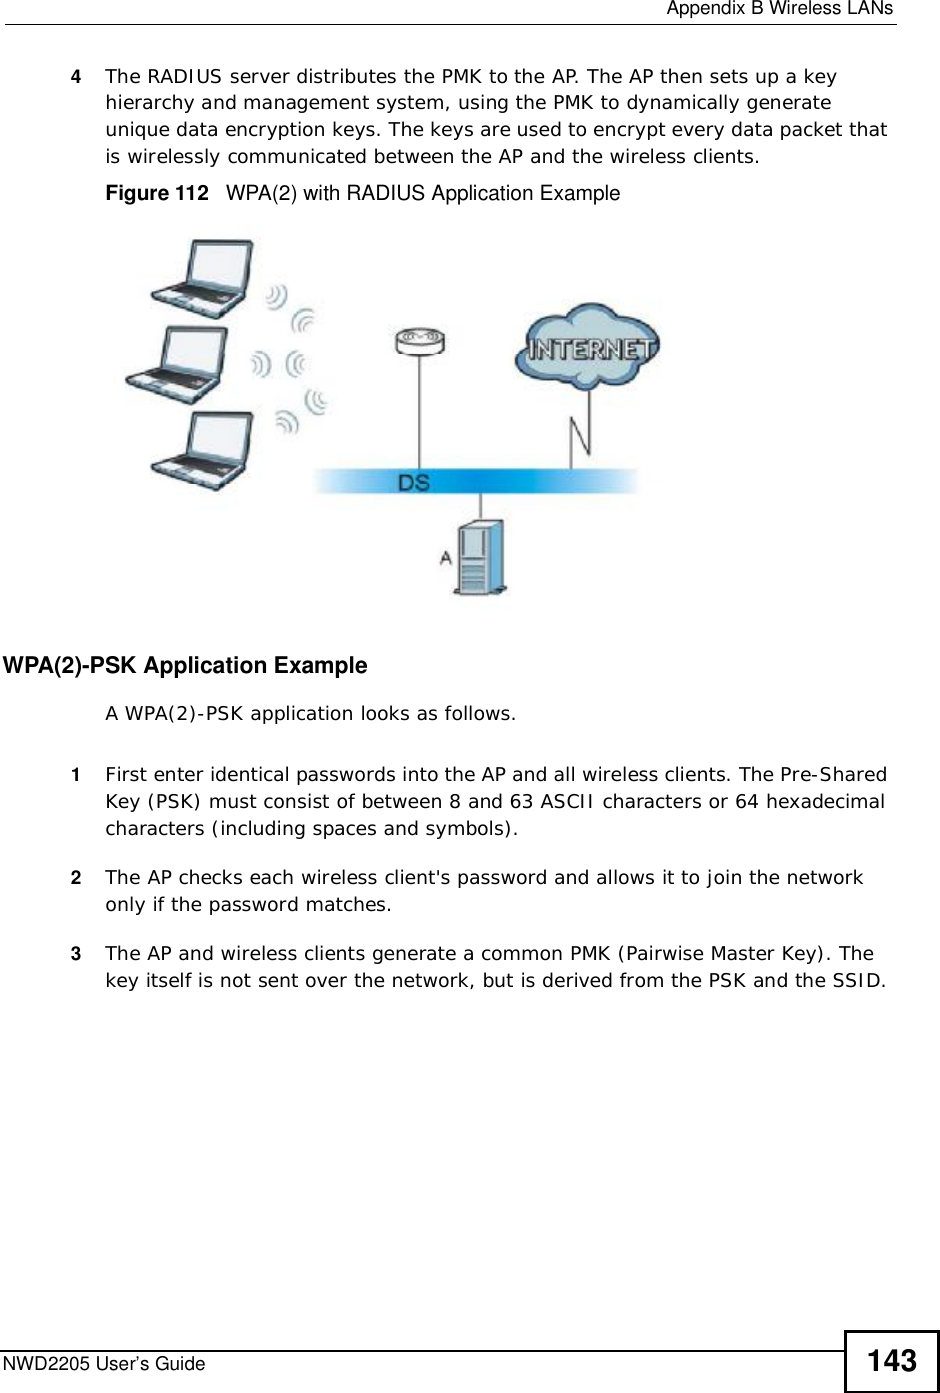  Appendix BWireless LANsNWD2205 User’s Guide 1434The RADIUS server distributes the PMK to the AP. The AP then sets up a key hierarchy and management system, using the PMK to dynamically generate unique data encryption keys. The keys are used to encrypt every data packet that is wirelessly communicated between the AP and the wireless clients.Figure 112   WPA(2) with RADIUS Application ExampleWPA(2)-PSK Application ExampleA WPA(2)-PSK application looks as follows.1First enter identical passwords into the AP and all wireless clients. The Pre-Shared Key (PSK) must consist of between 8 and 63 ASCII characters or 64 hexadecimal characters (including spaces and symbols).2The AP checks each wireless client&apos;s password and allows it to join the network only if the password matches.3The AP and wireless clients generate a common PMK (Pairwise Master Key). The key itself is not sent over the network, but is derived from the PSK and the SSID. 